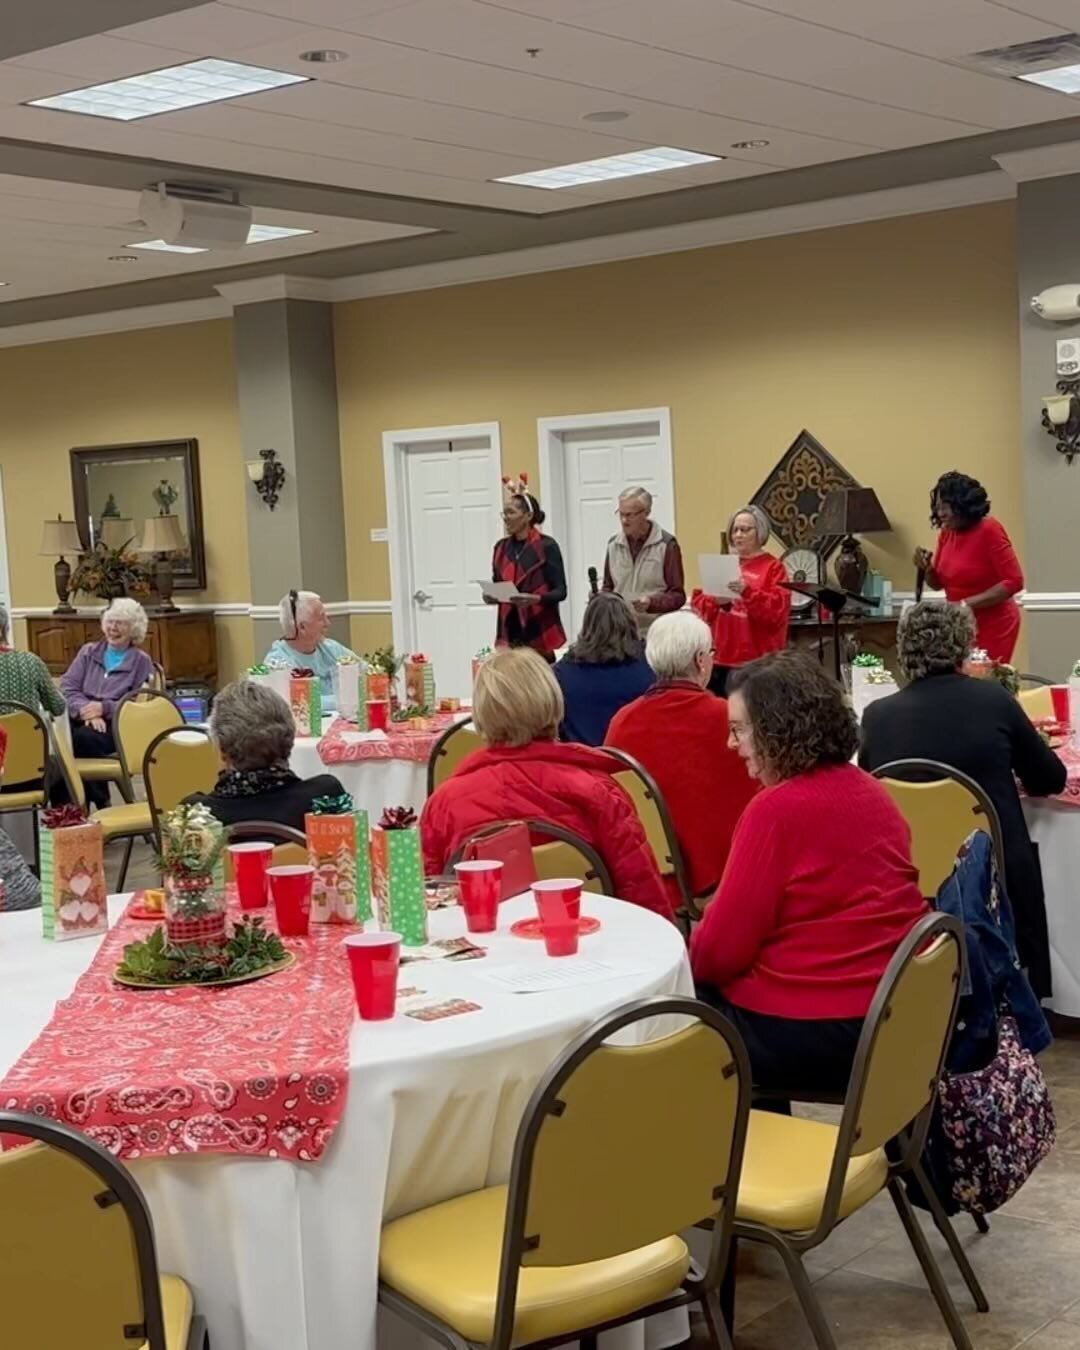 Celebrating joy and compassion at the Hospice &amp; Palliative Care of the Piedmont&rsquo;s volunteer Christmas party! 🎄❤️ Grateful for the laughter and warmth shared by our incredible volunteers. #HolidayCheers #VolunteerLove #HospicePiedmont